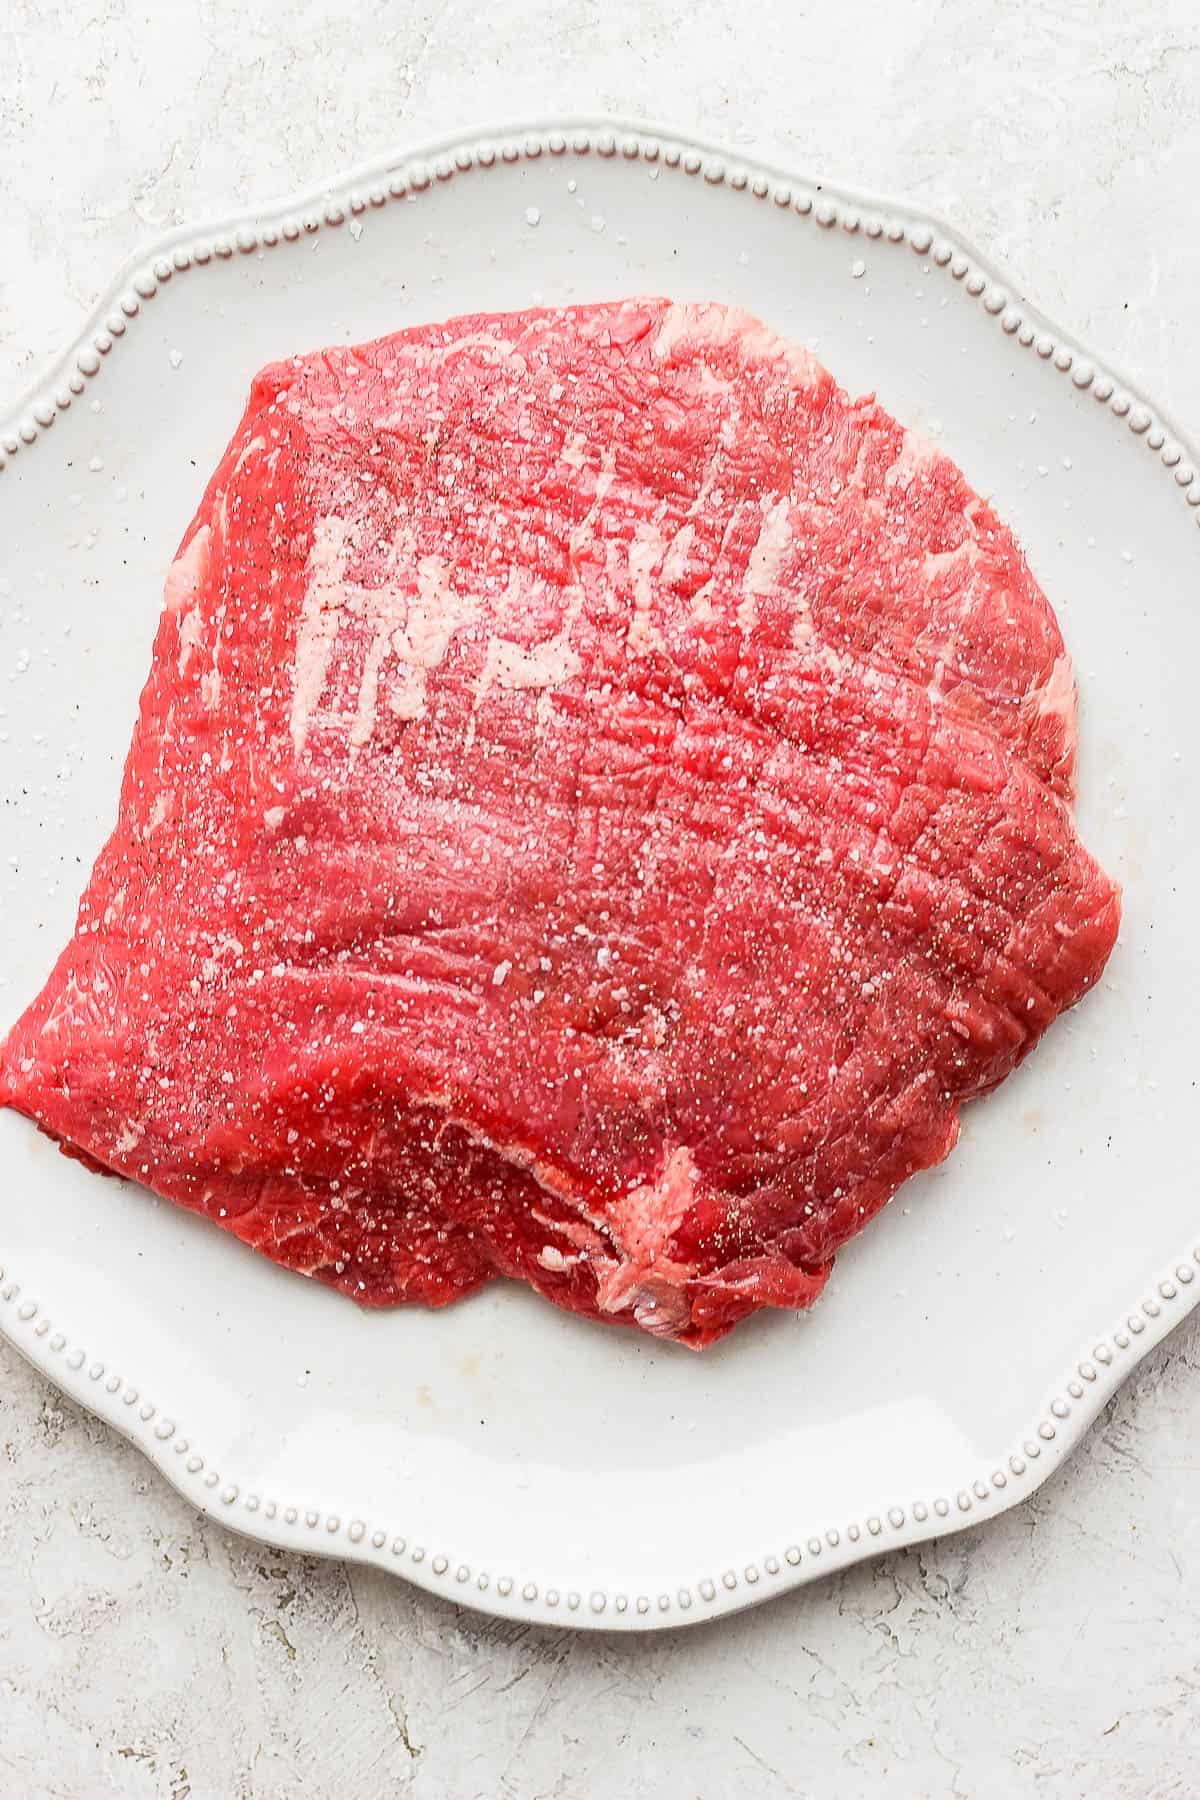 A raw flank steak sprinkled with salt and pepper on a white plate.